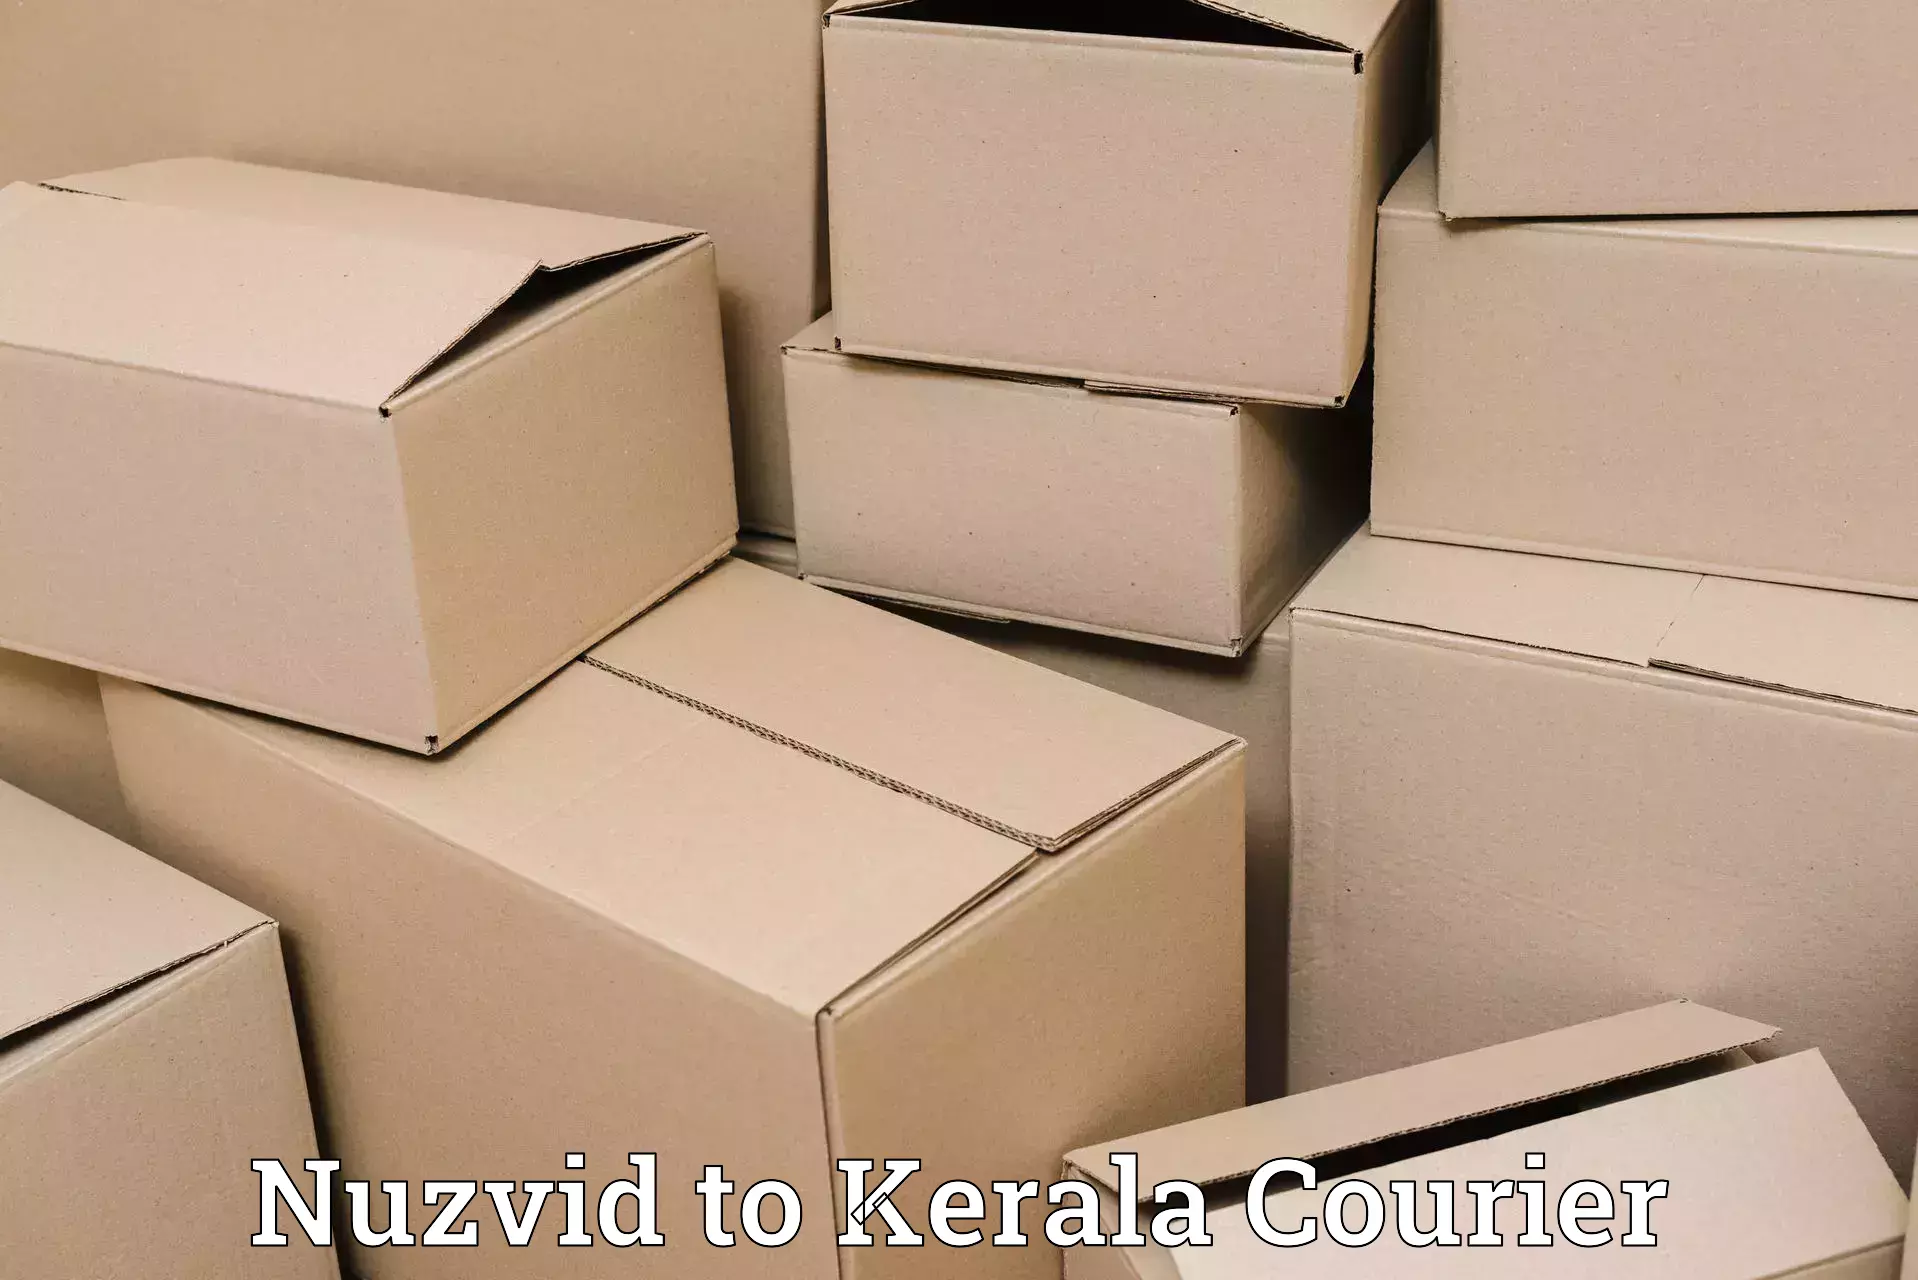 High-speed delivery Nuzvid to Kochi